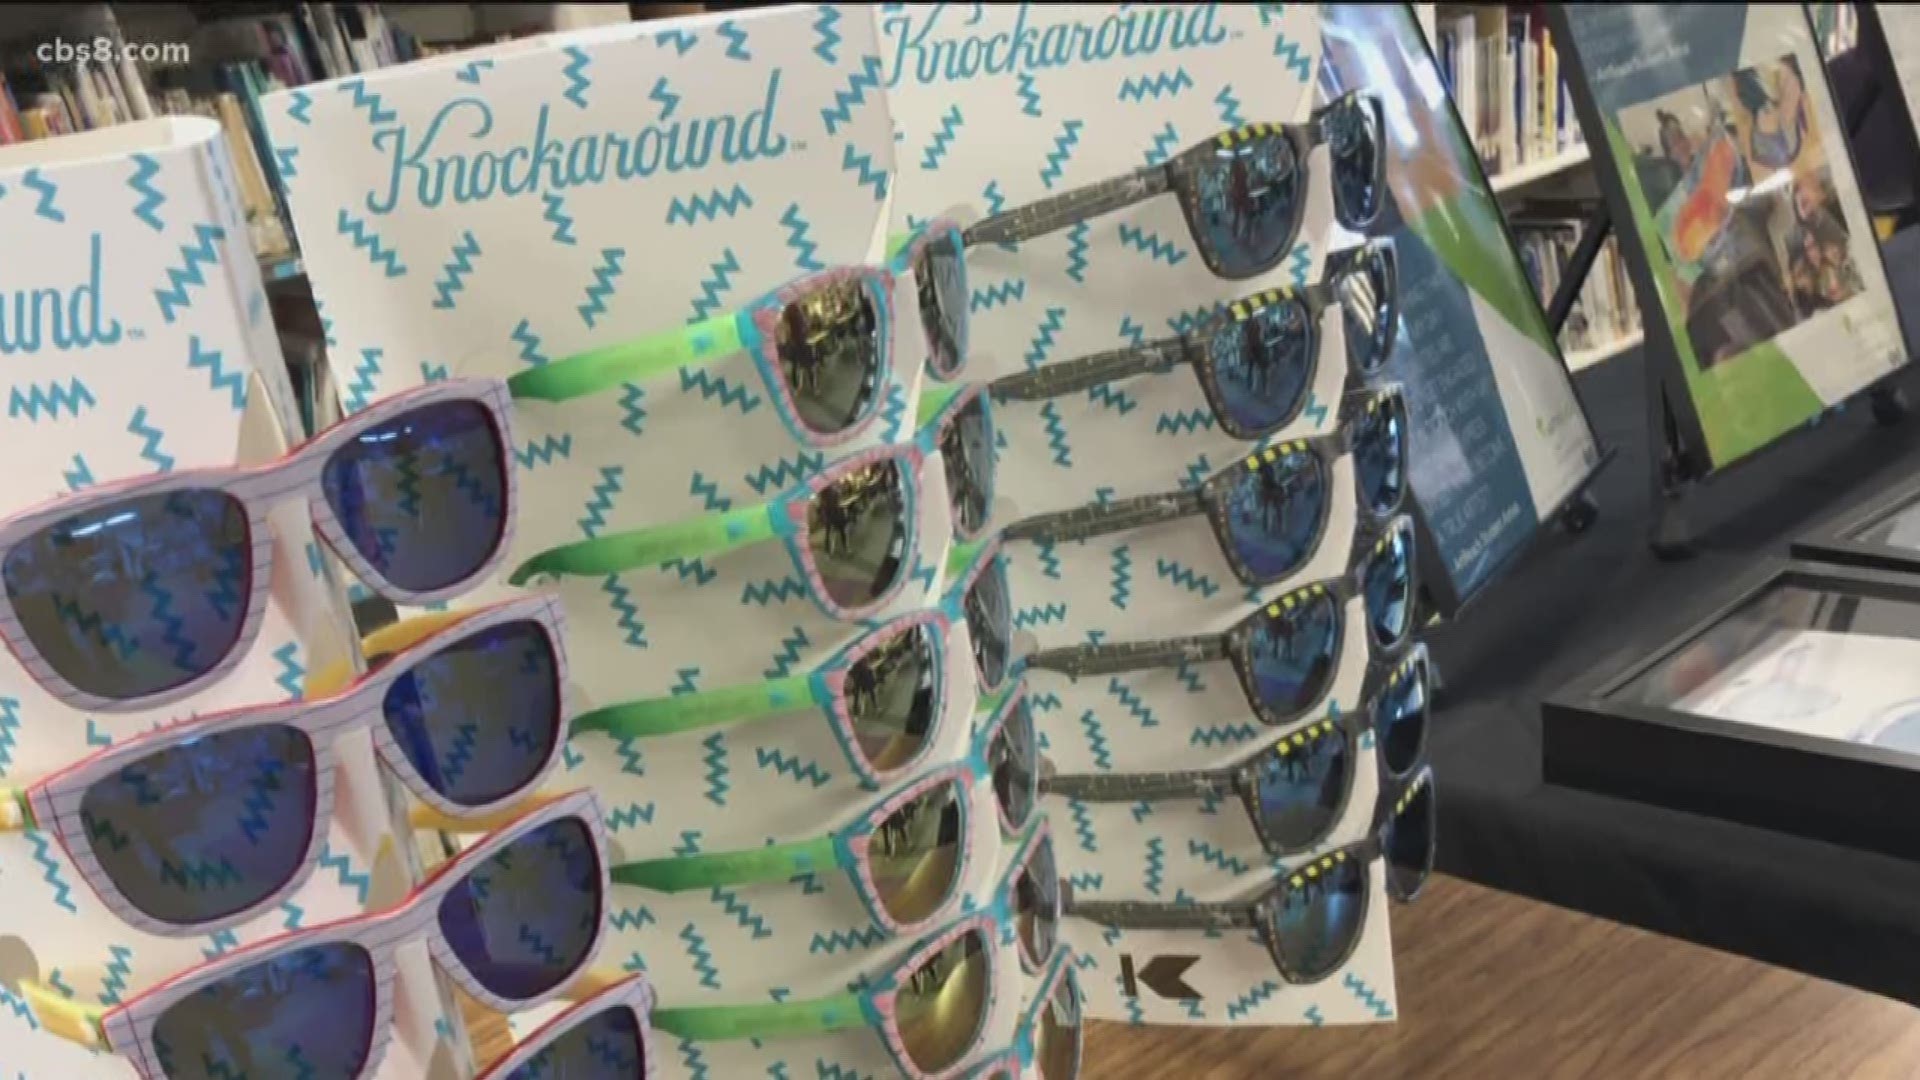 Jeff Zevely fom the Zevely Zone traveled to Spring Valley's Rancho Elementary where charity and art collided in a sunglasses contest.